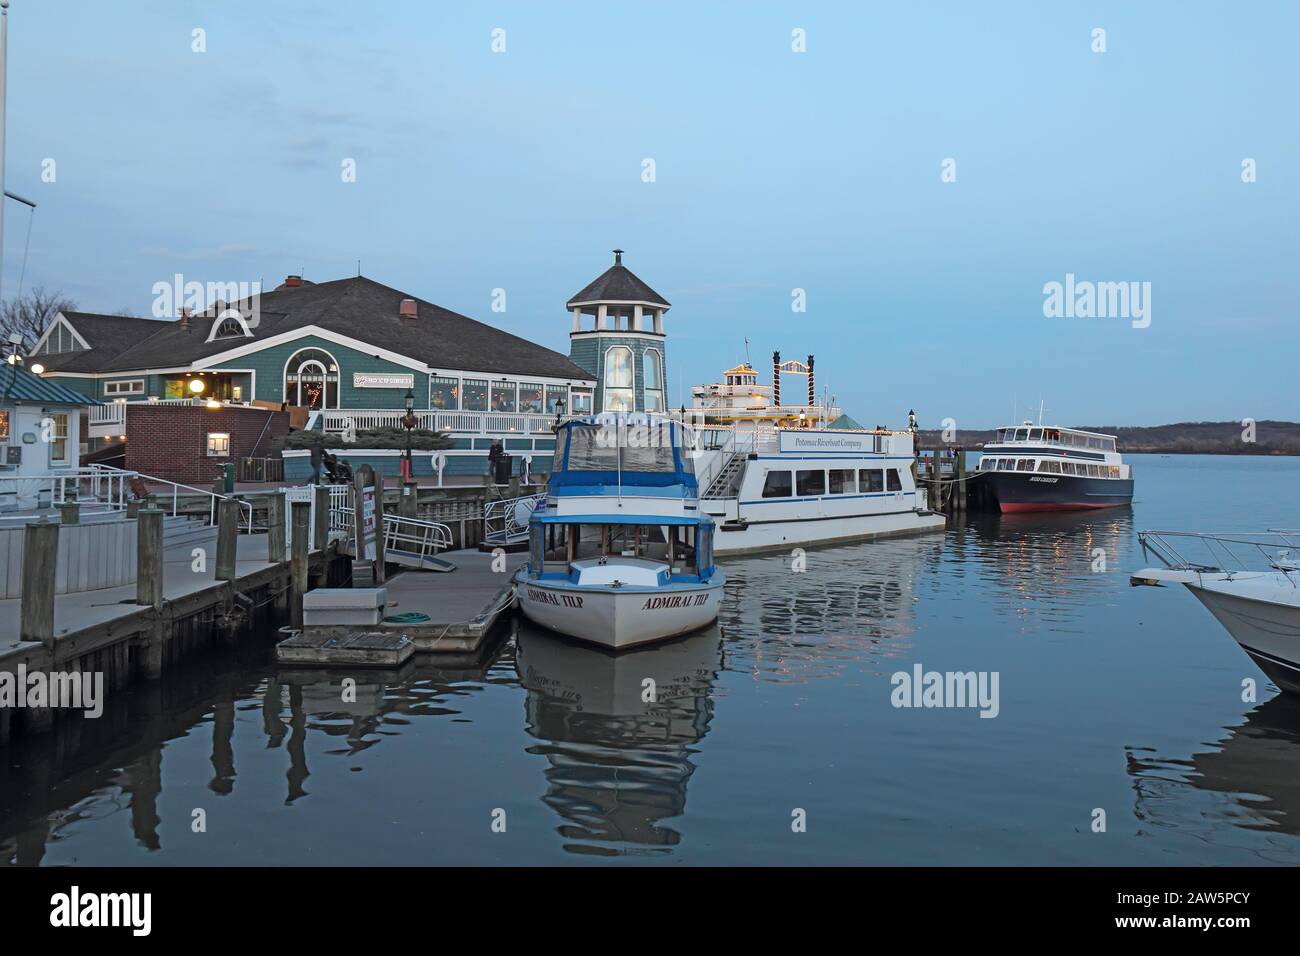 Boats and businesses at the waterfront of Alexandria, Virginia at sunset Stock Photo